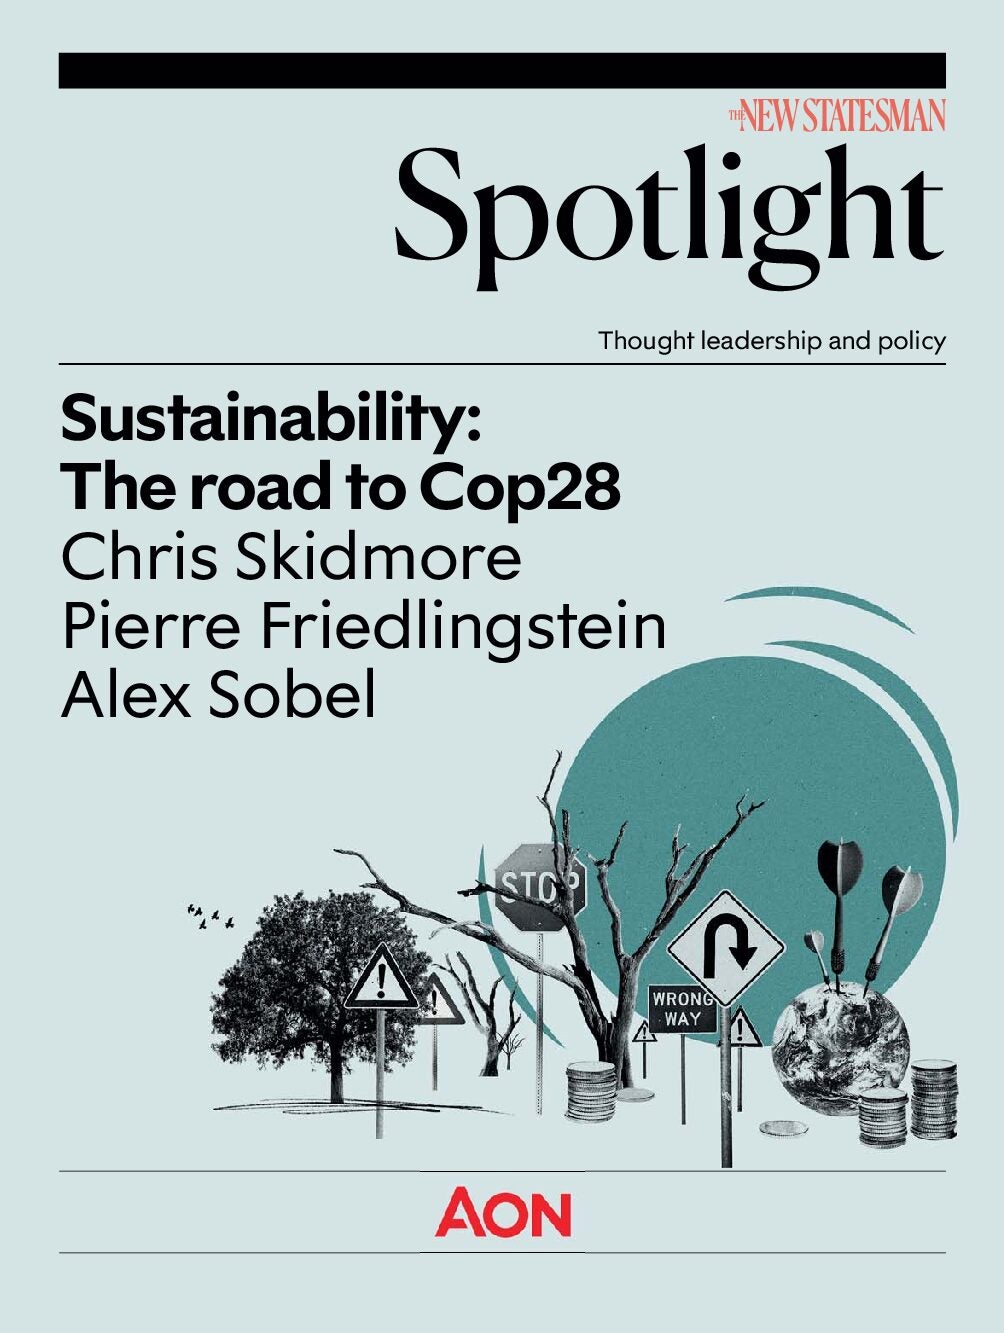 Sustainability: The road to Cop28